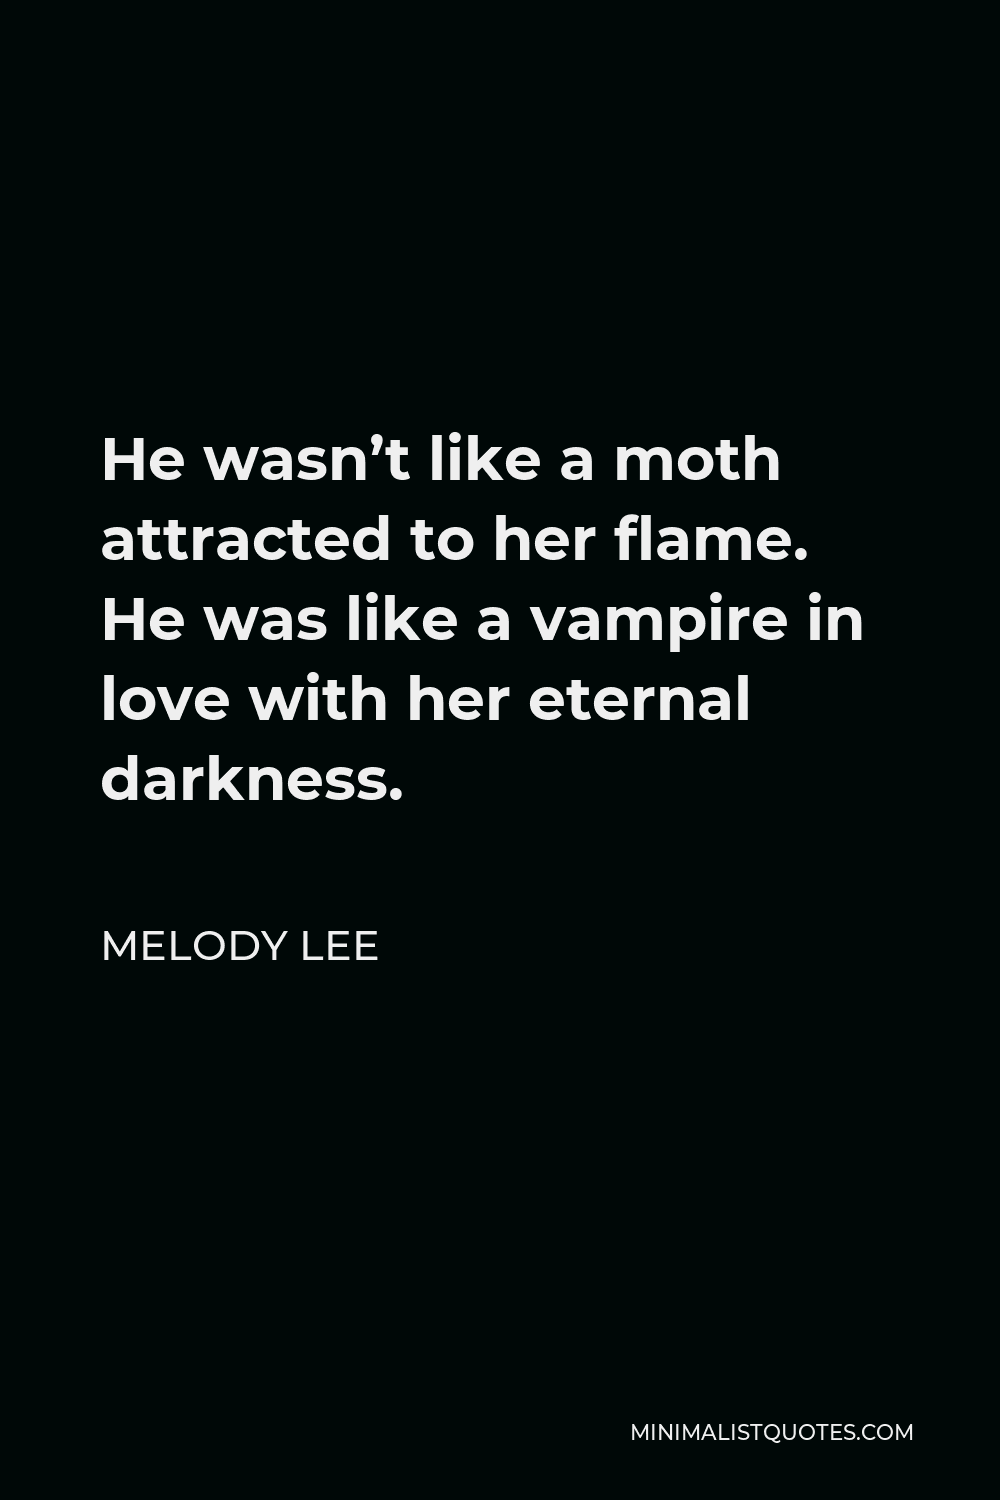 Melody Lee Quote - He wasn’t like a moth attracted to her flame. He was like a vampire in love with her eternal darkness.